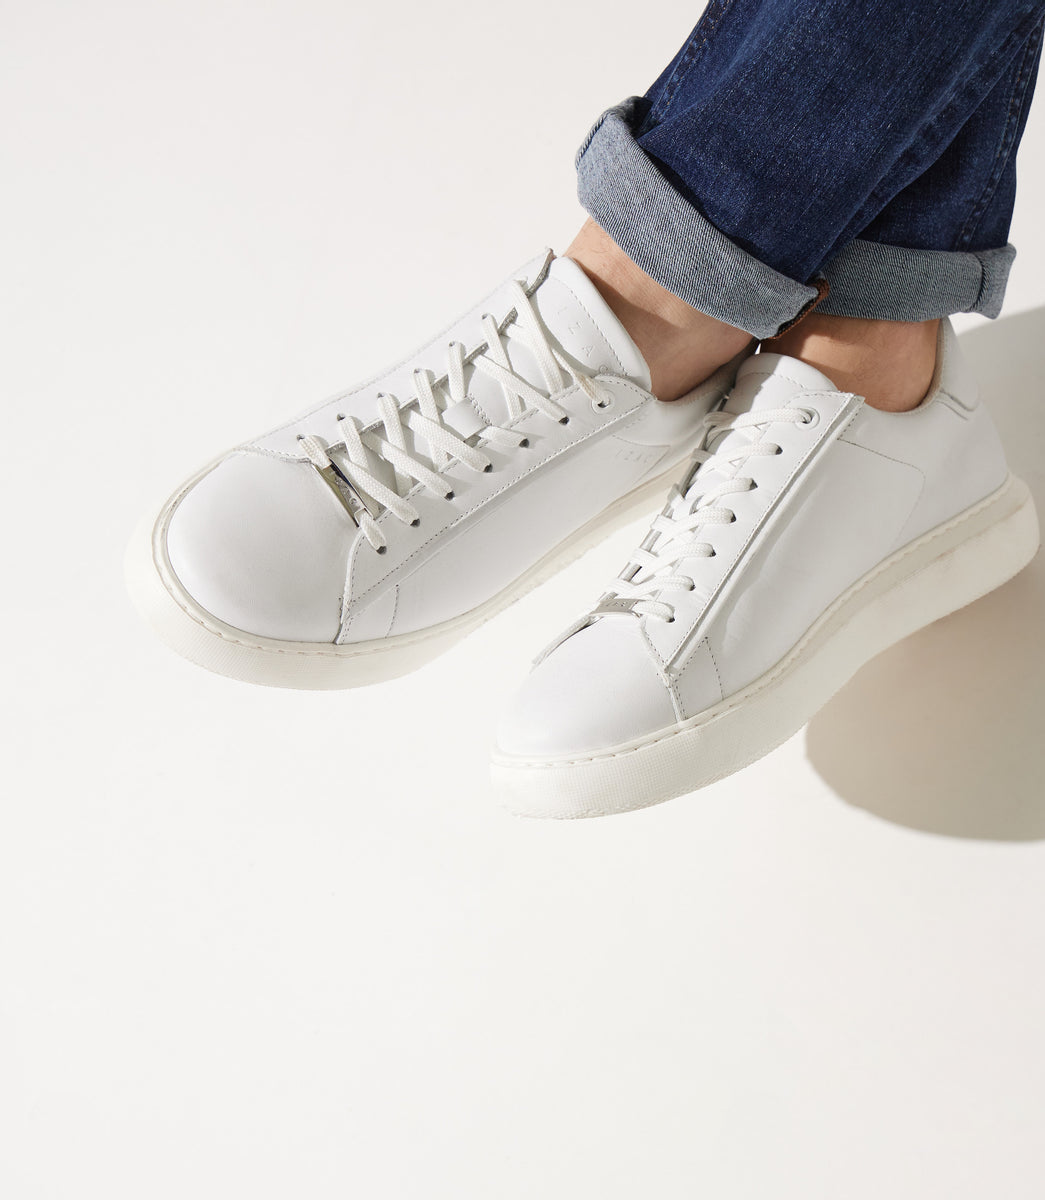 Baskets Blanches Homme : Baskets et Sneakers Blanches - IZAC